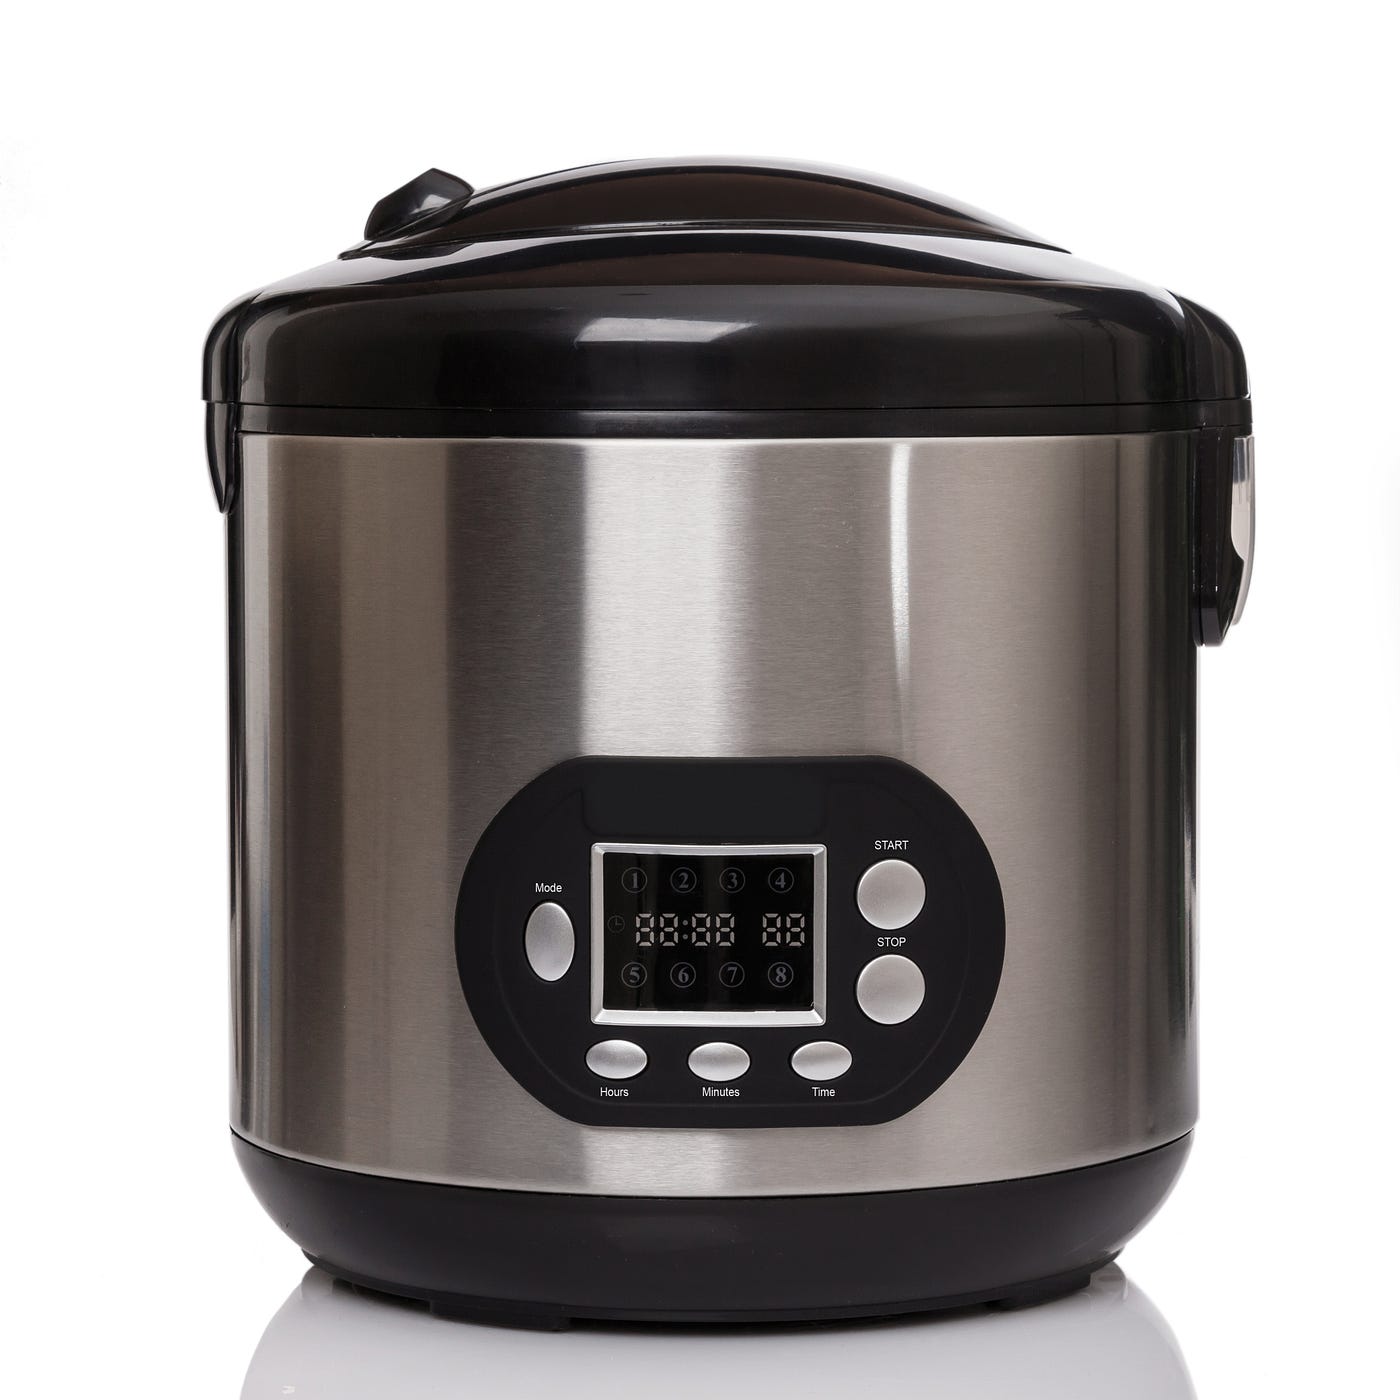 Health Benefits of Non-toxic Rice Cooker | by Mary Burrow | Medium